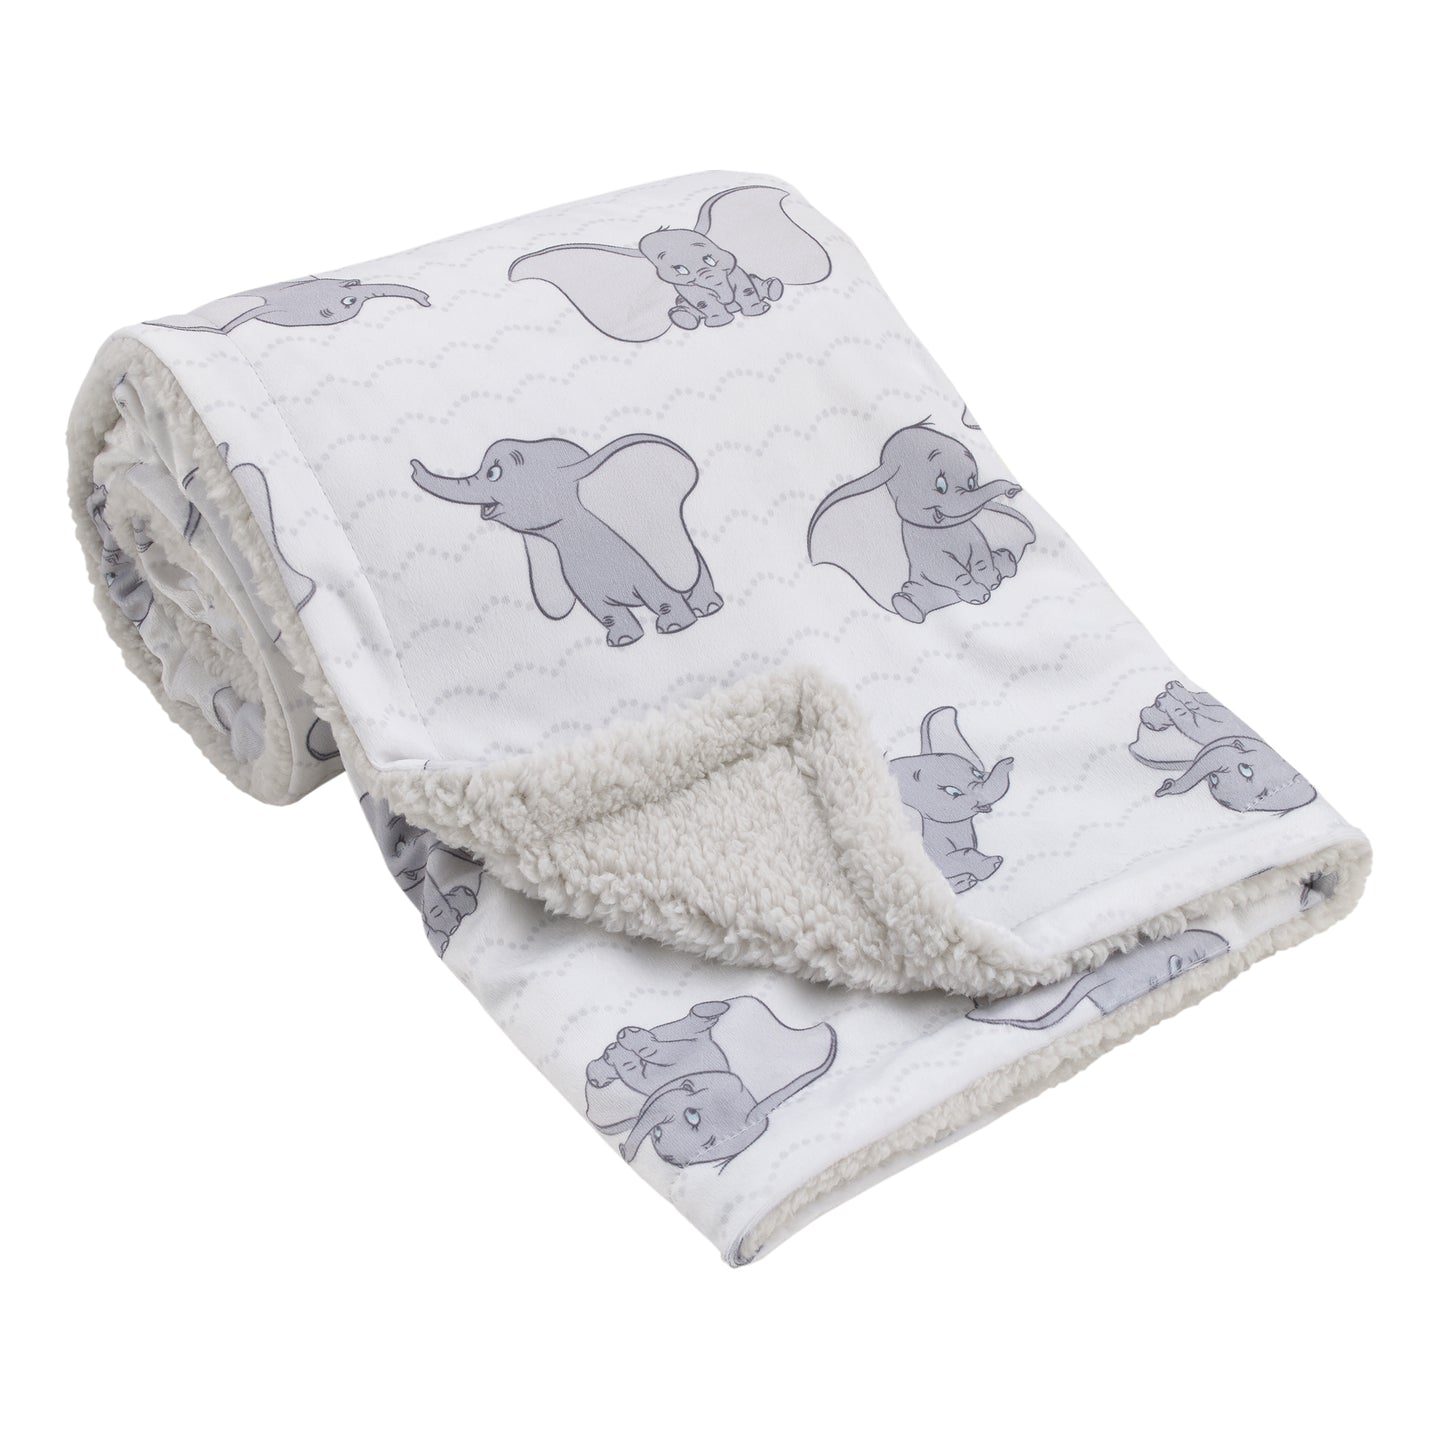 Disney Dumbo White and Grey Super Soft Baby Blanket with Sherpa Back